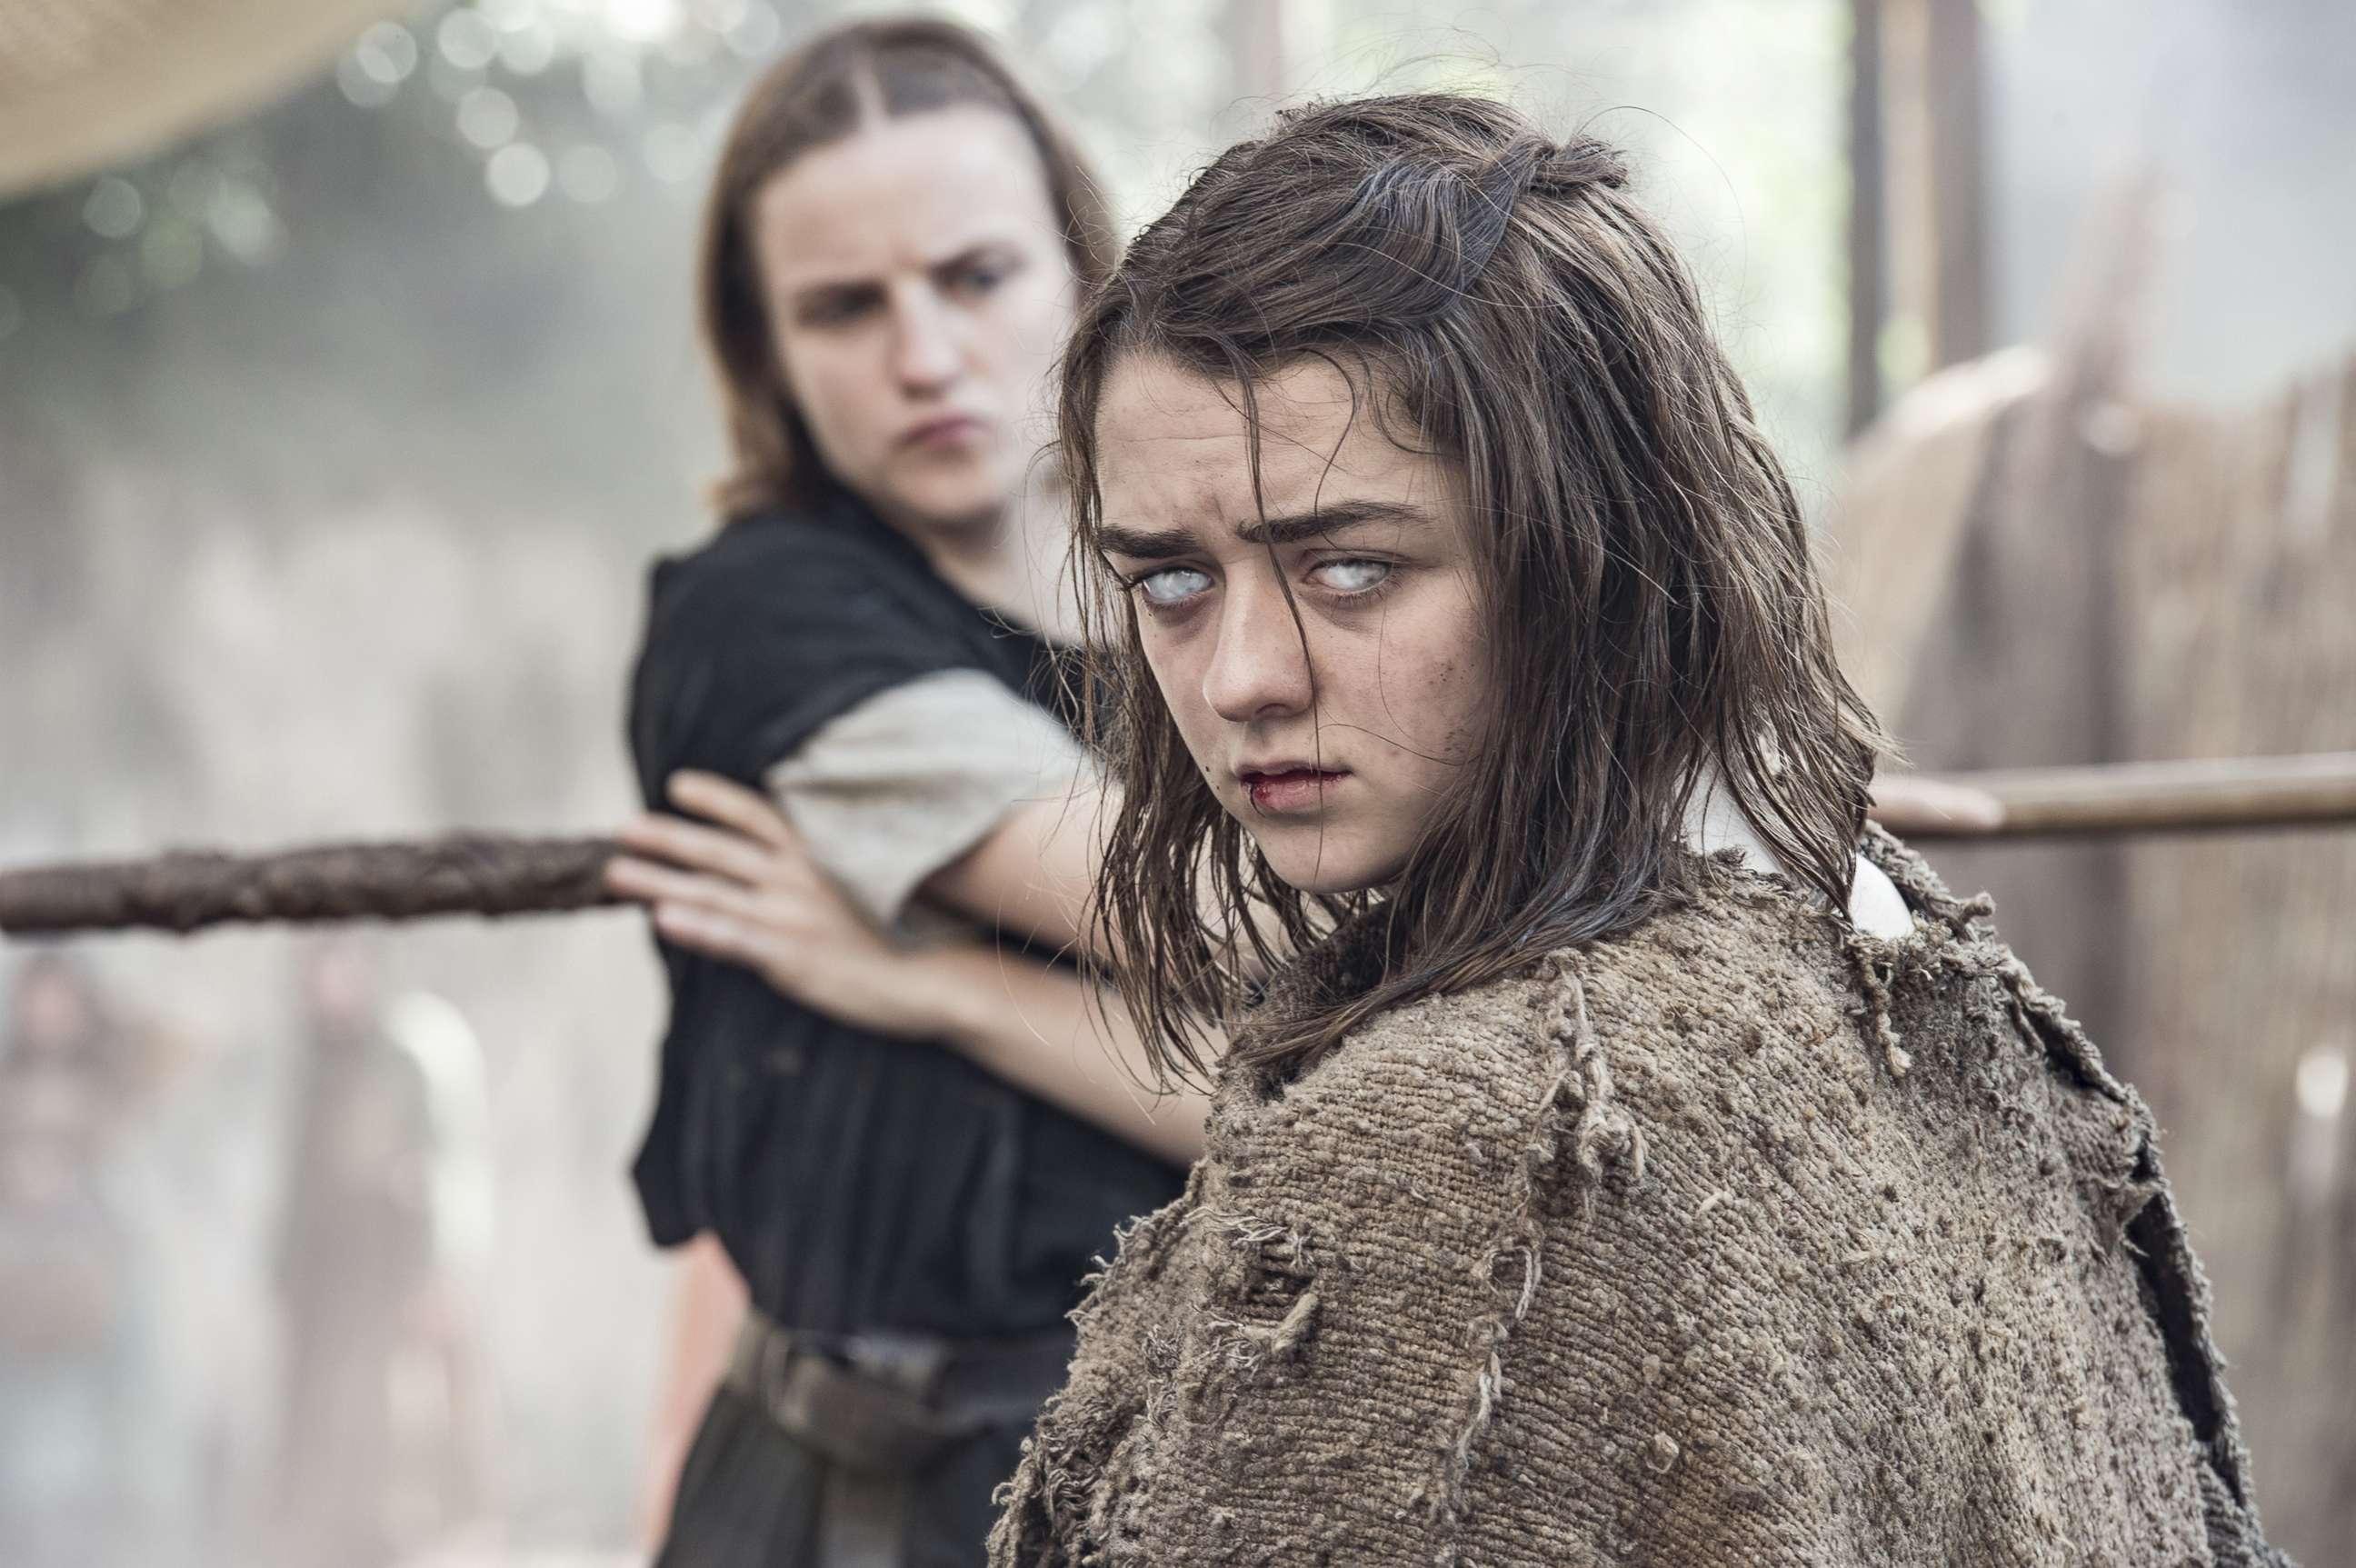 PHOTO: Maisie Williams as Arya Stark in the "Game of Thrones."